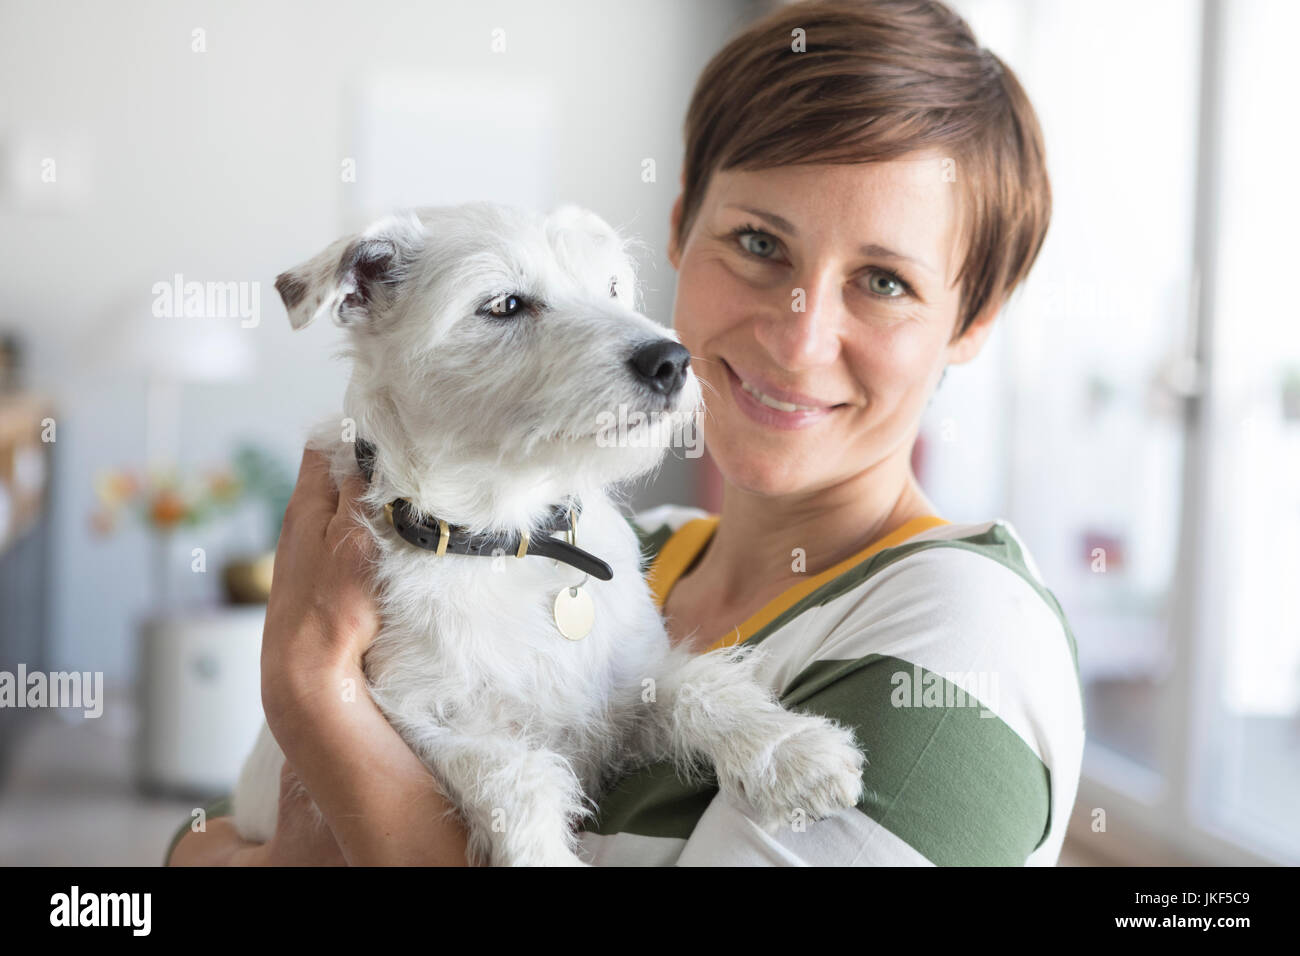 Portrait of smiling woman holding dog on her amrs Stock Photo